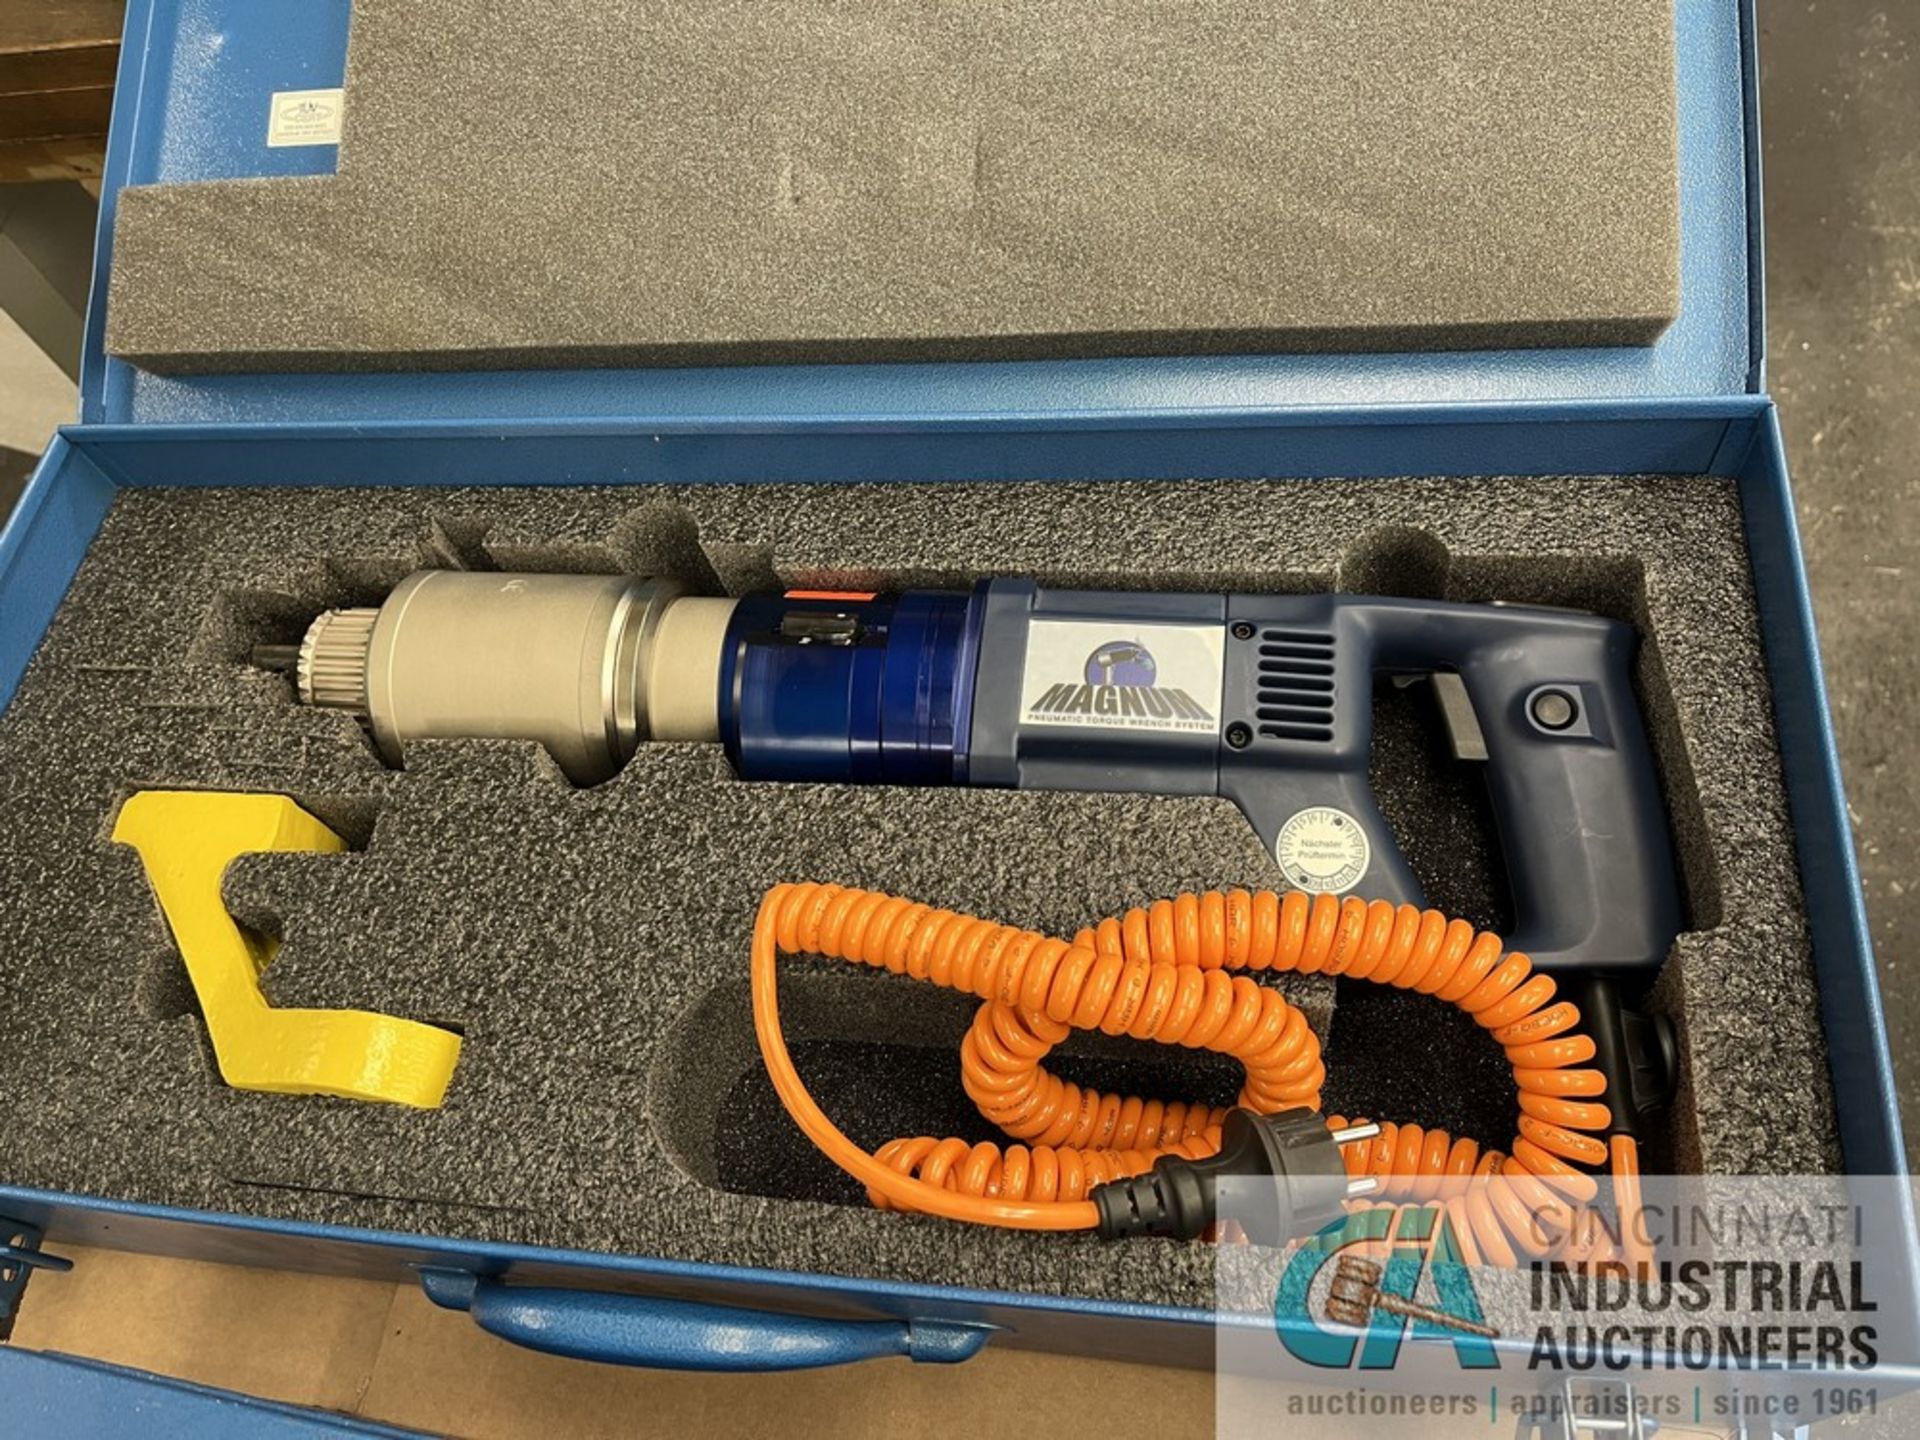 MAGNUM ELECTRIC TORQUE WRENCH IN BOX